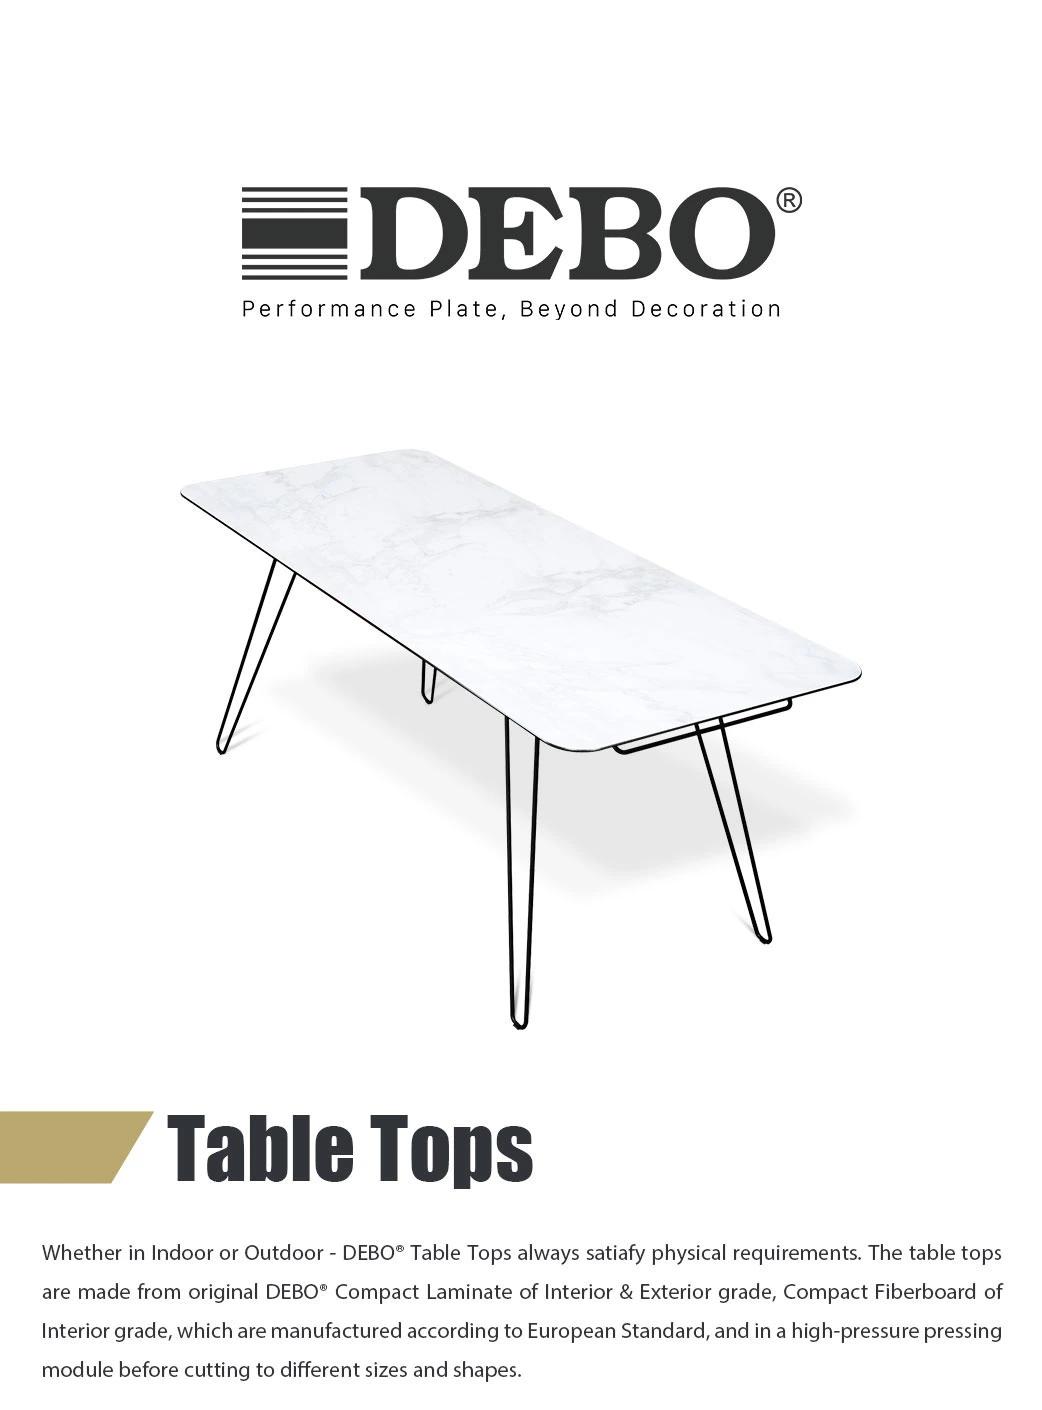 Office Furniture Debo Easy Clean HPL Compact Laminate Office Table Desk Modern for Home Office